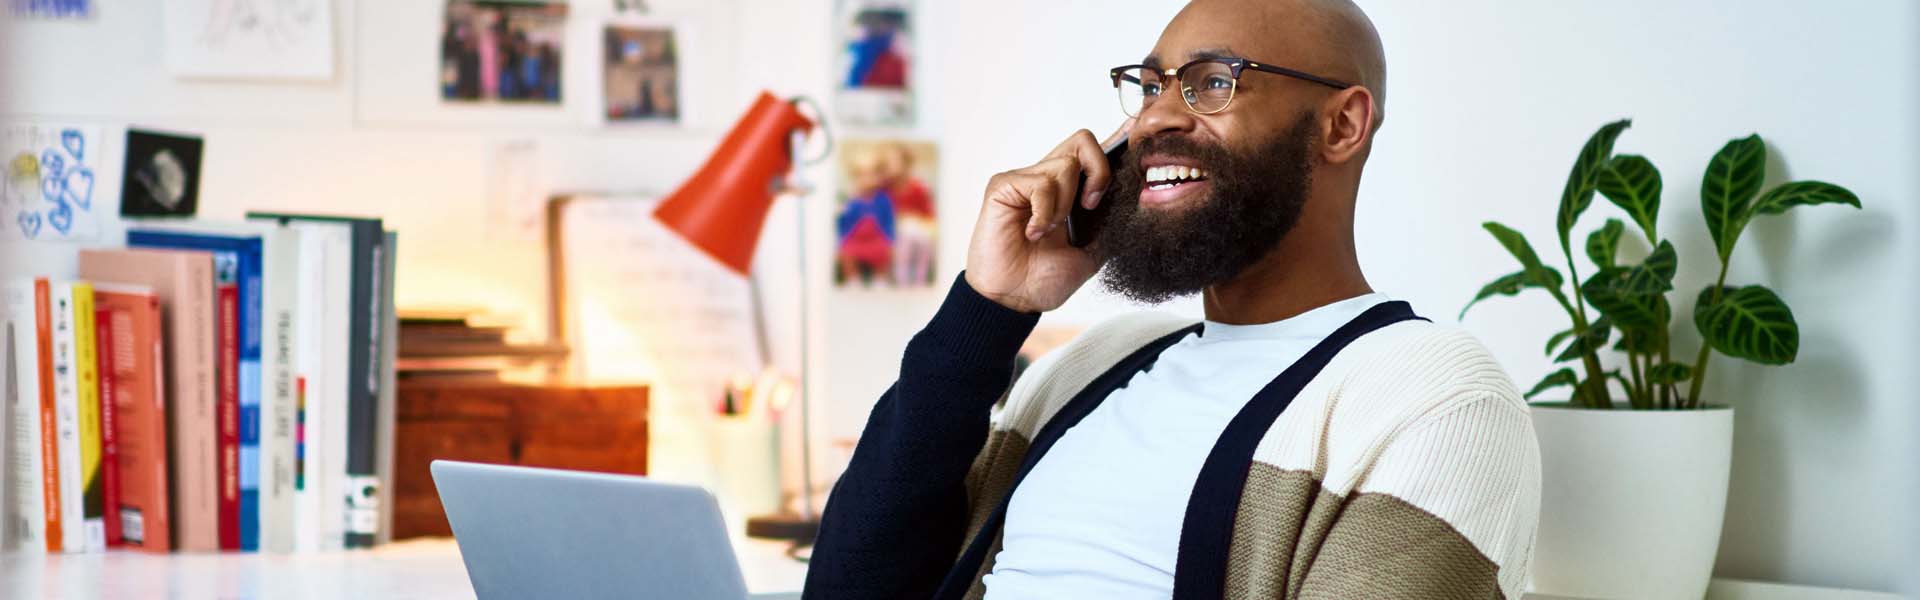 Cheerful businessman working from home on phone